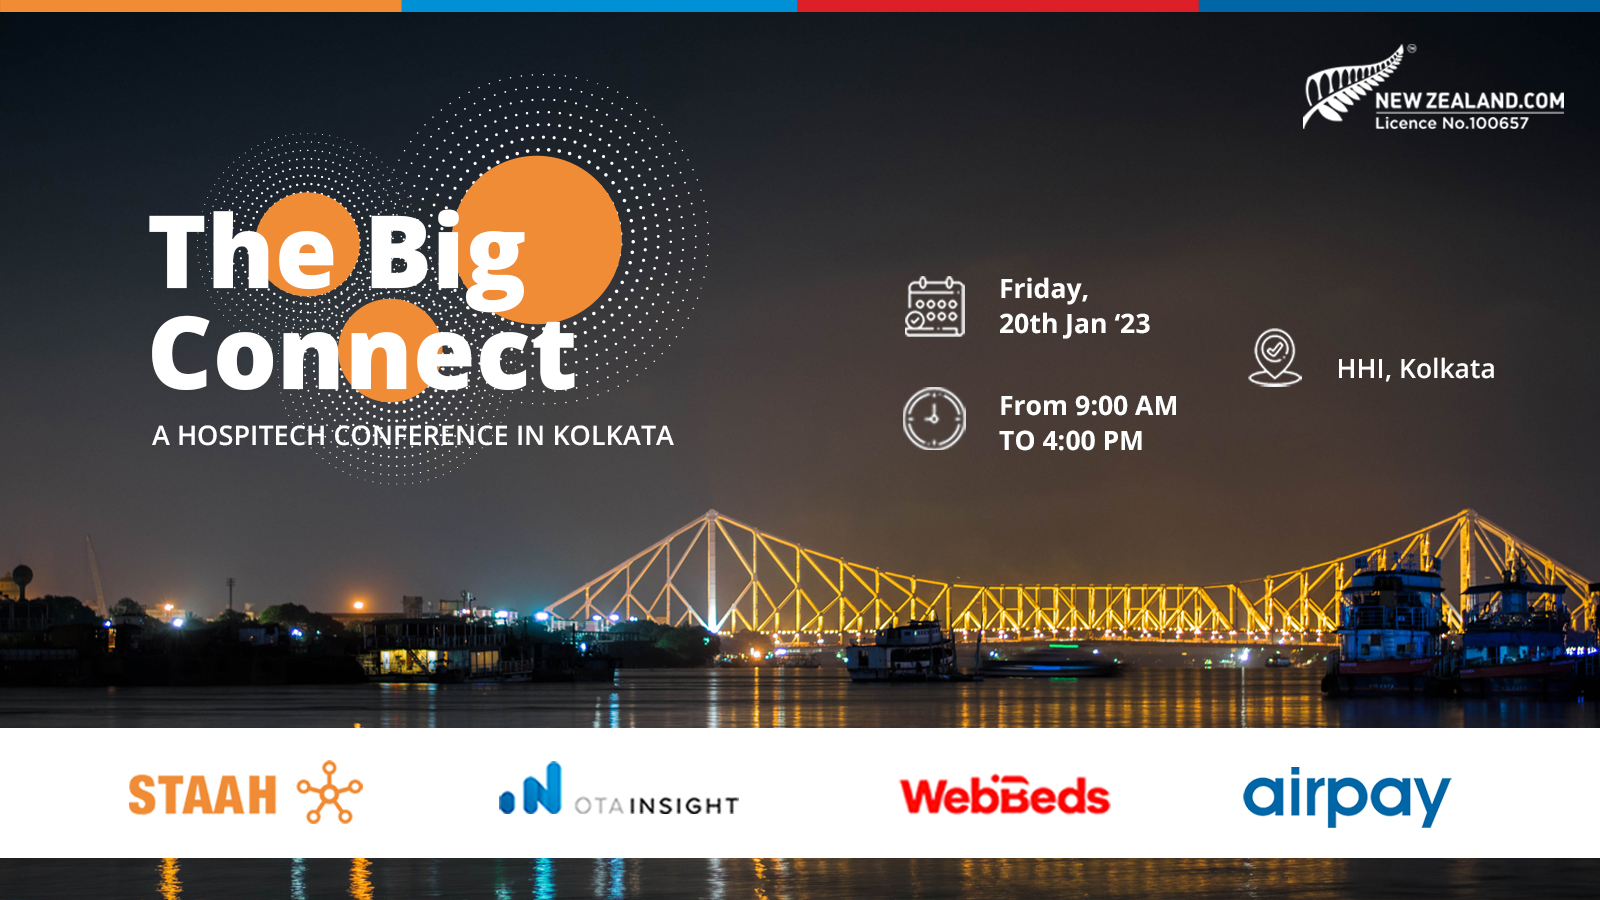 STAAH to host The Big Connect’ Hospitech conference in Kolkata on Jan 20